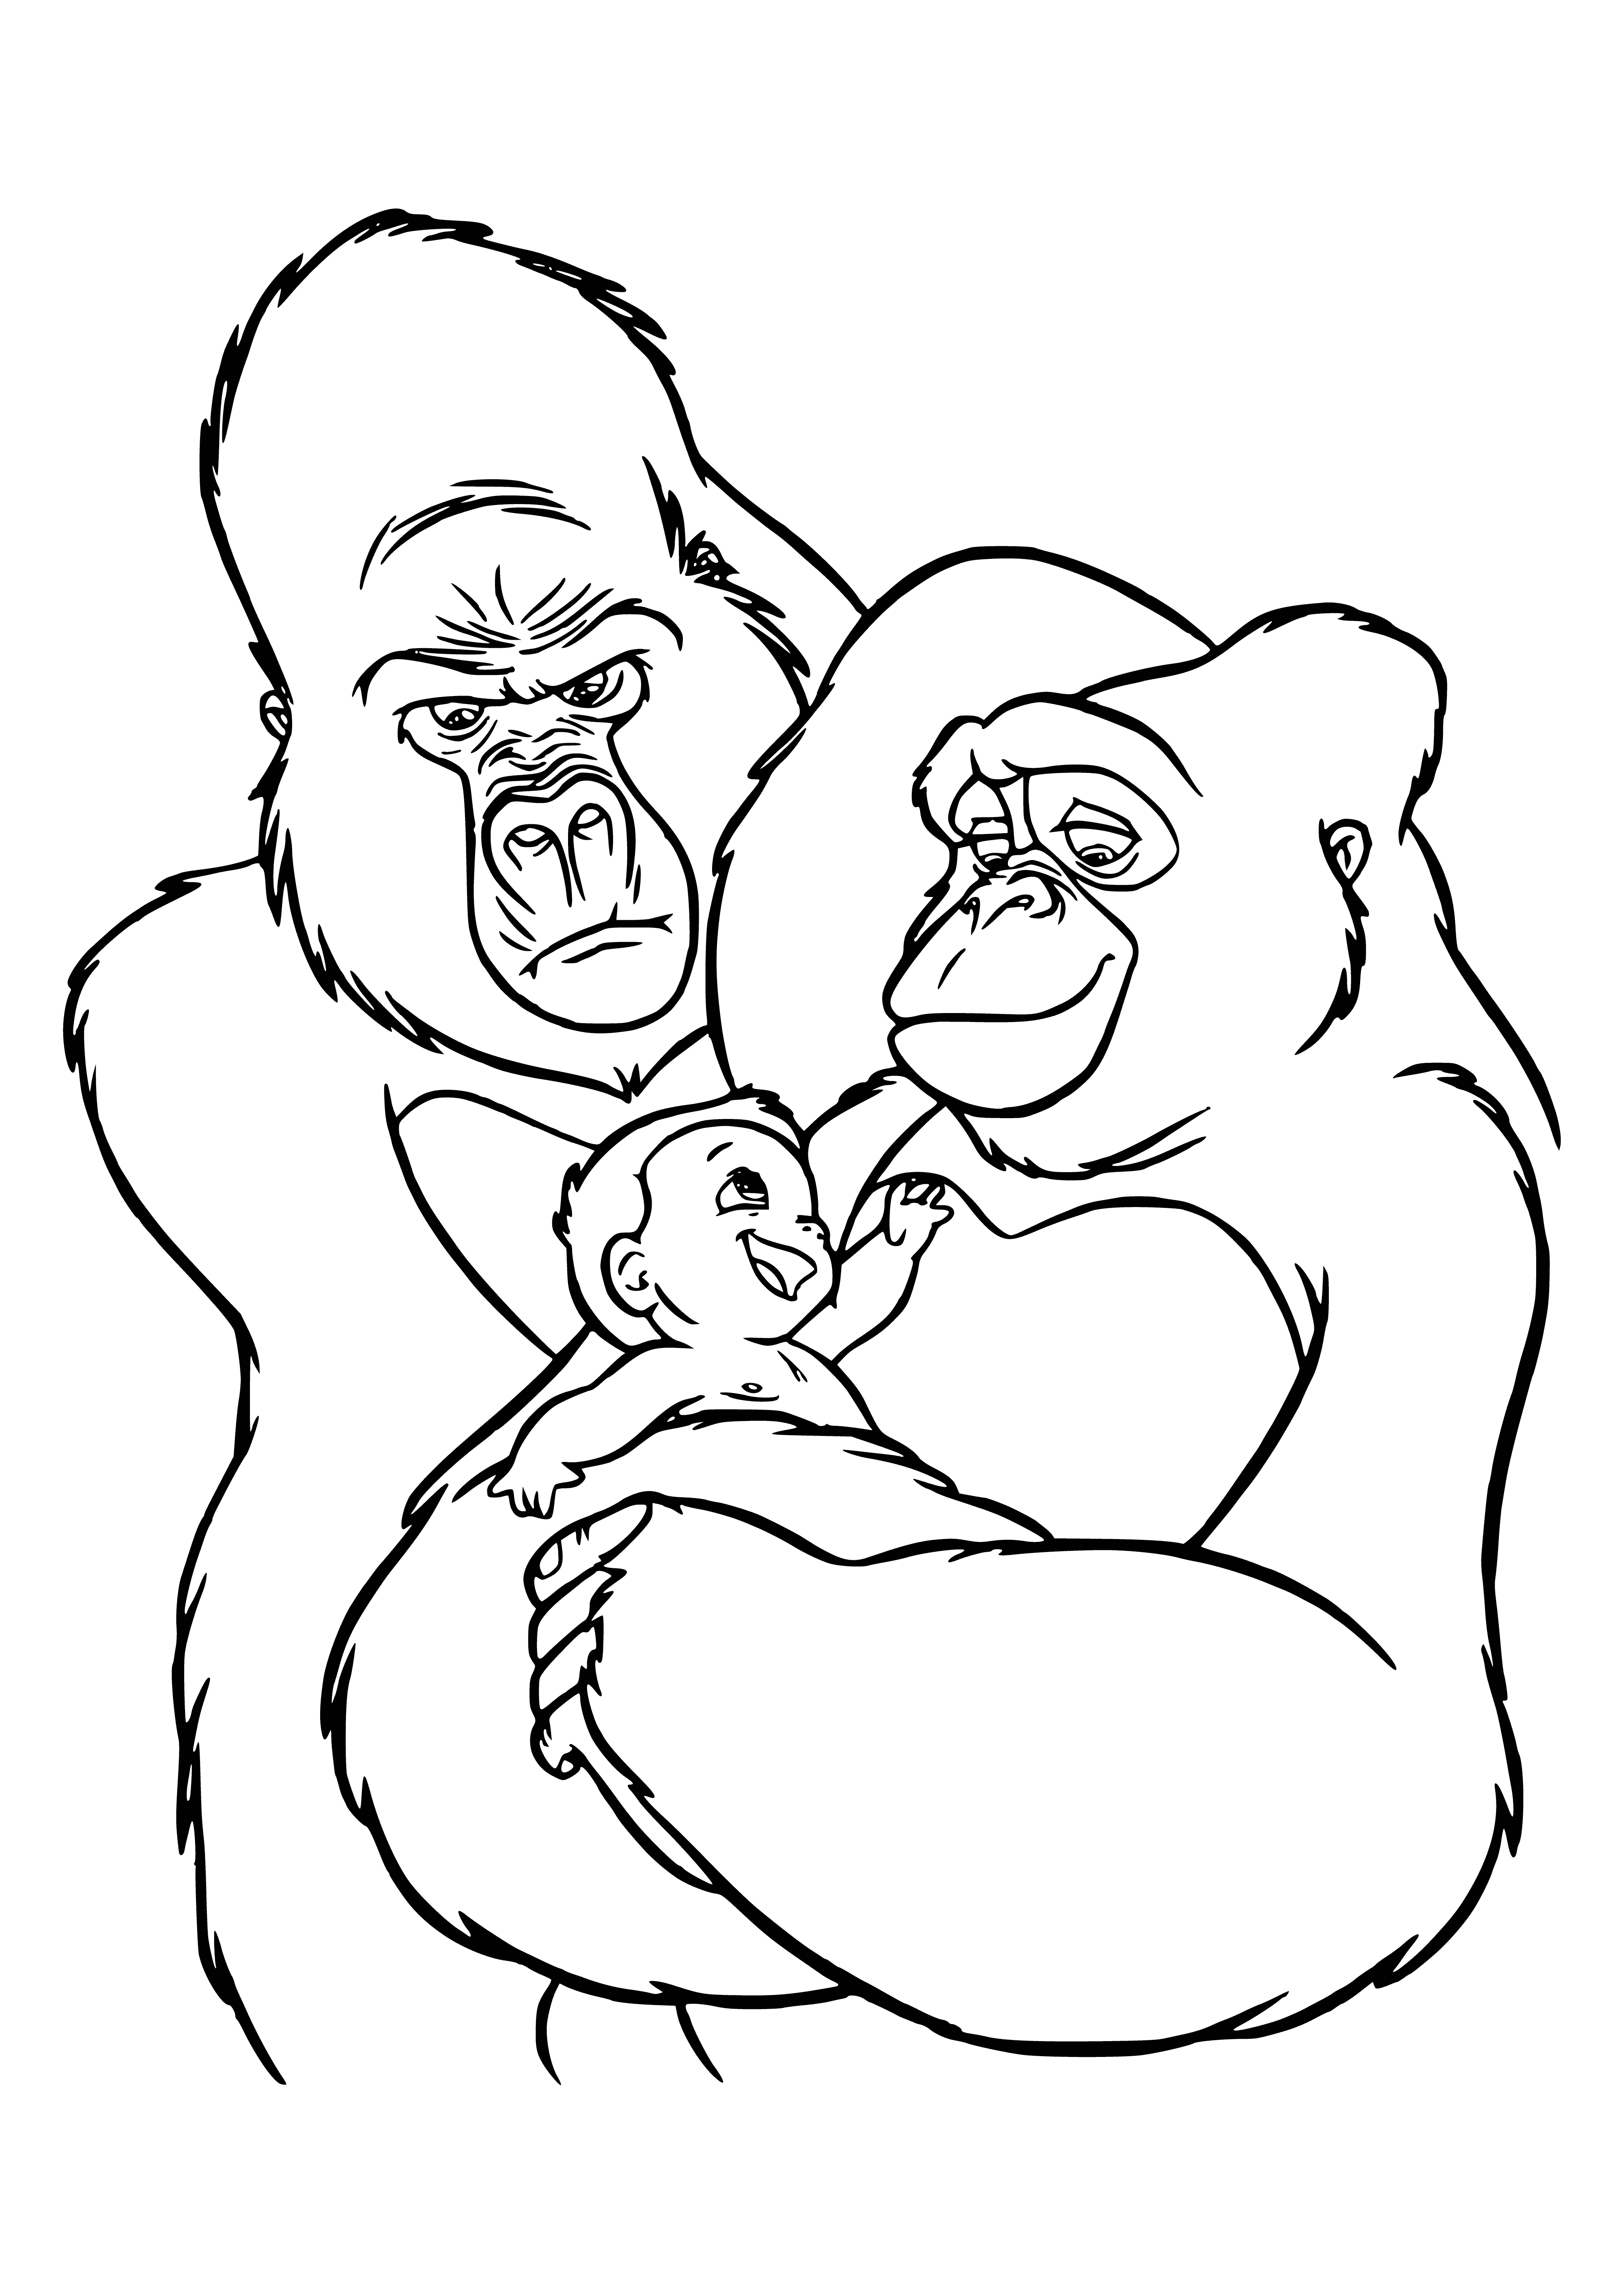 The new Tarzan family coloring page